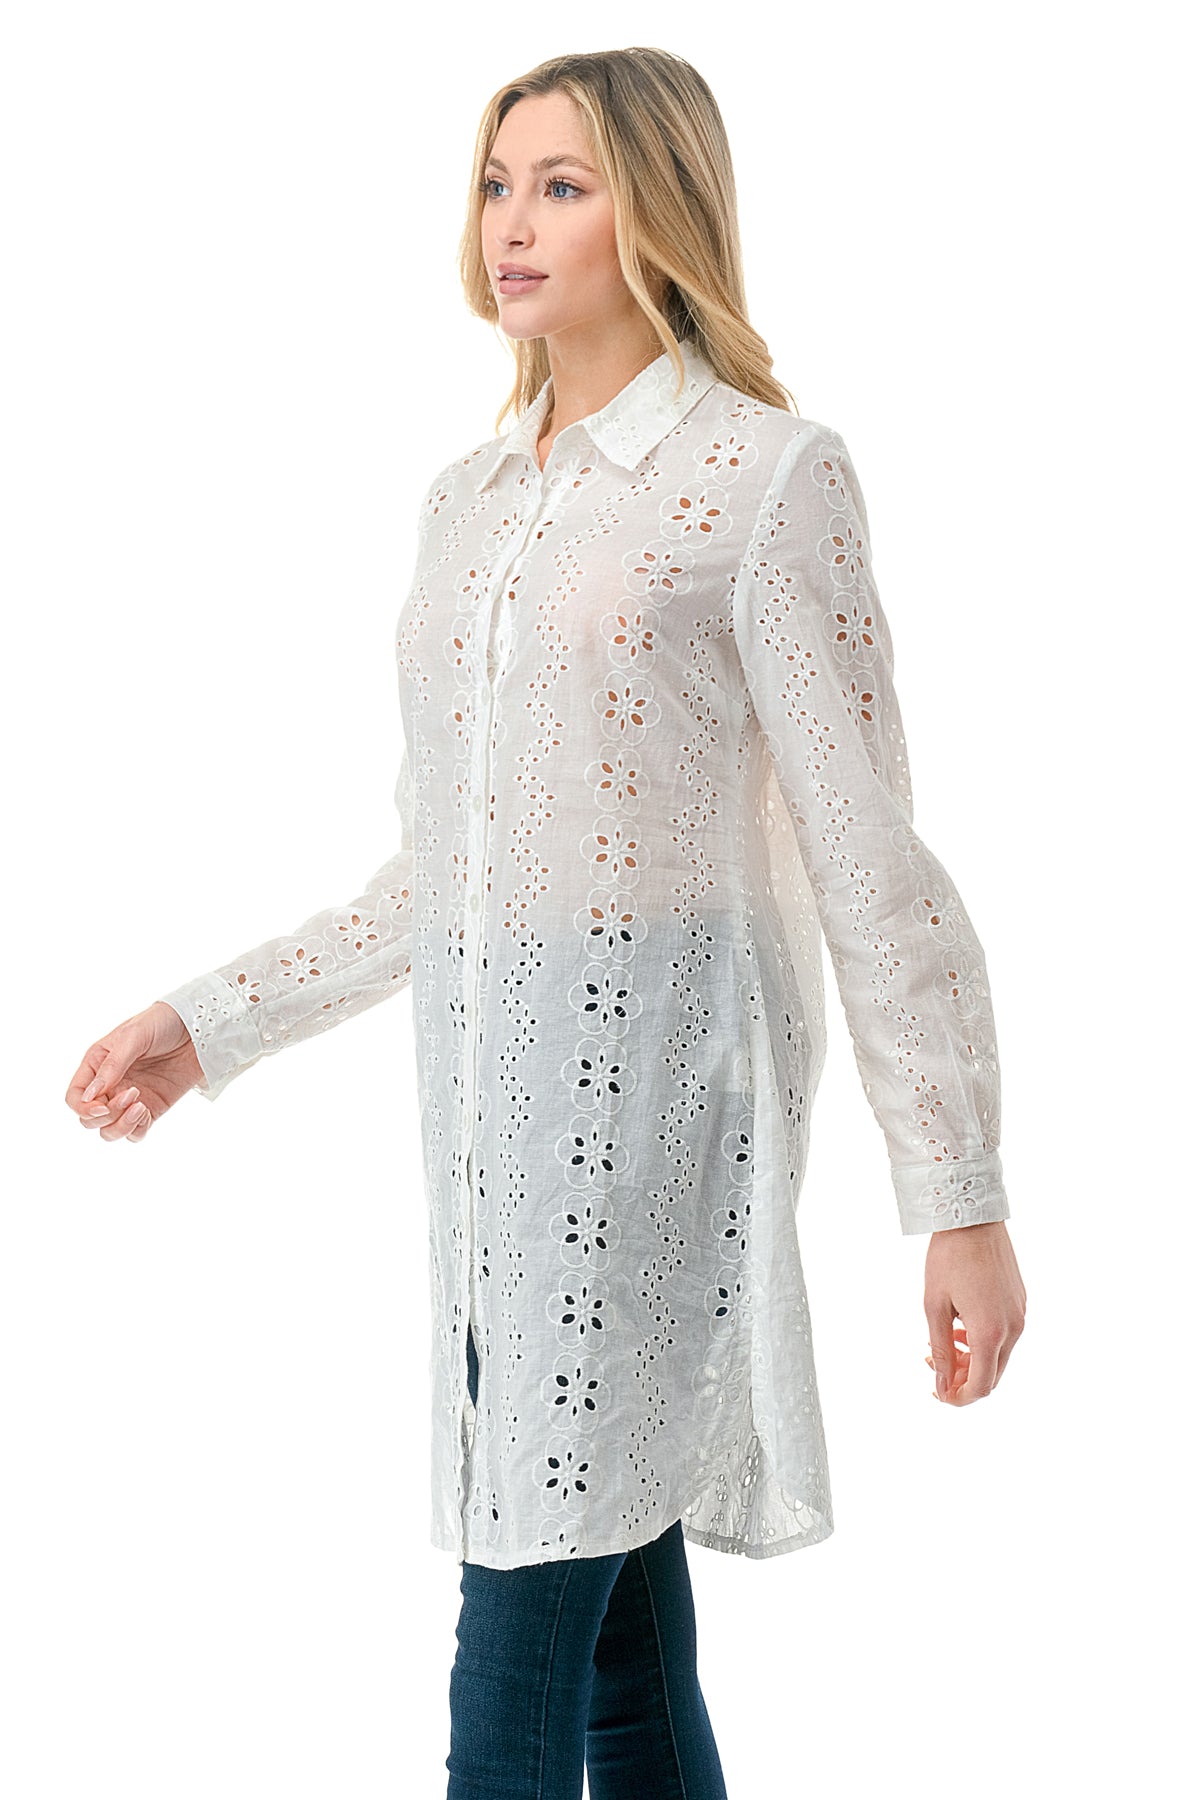 Ivory Eyelet Button Down Shirt